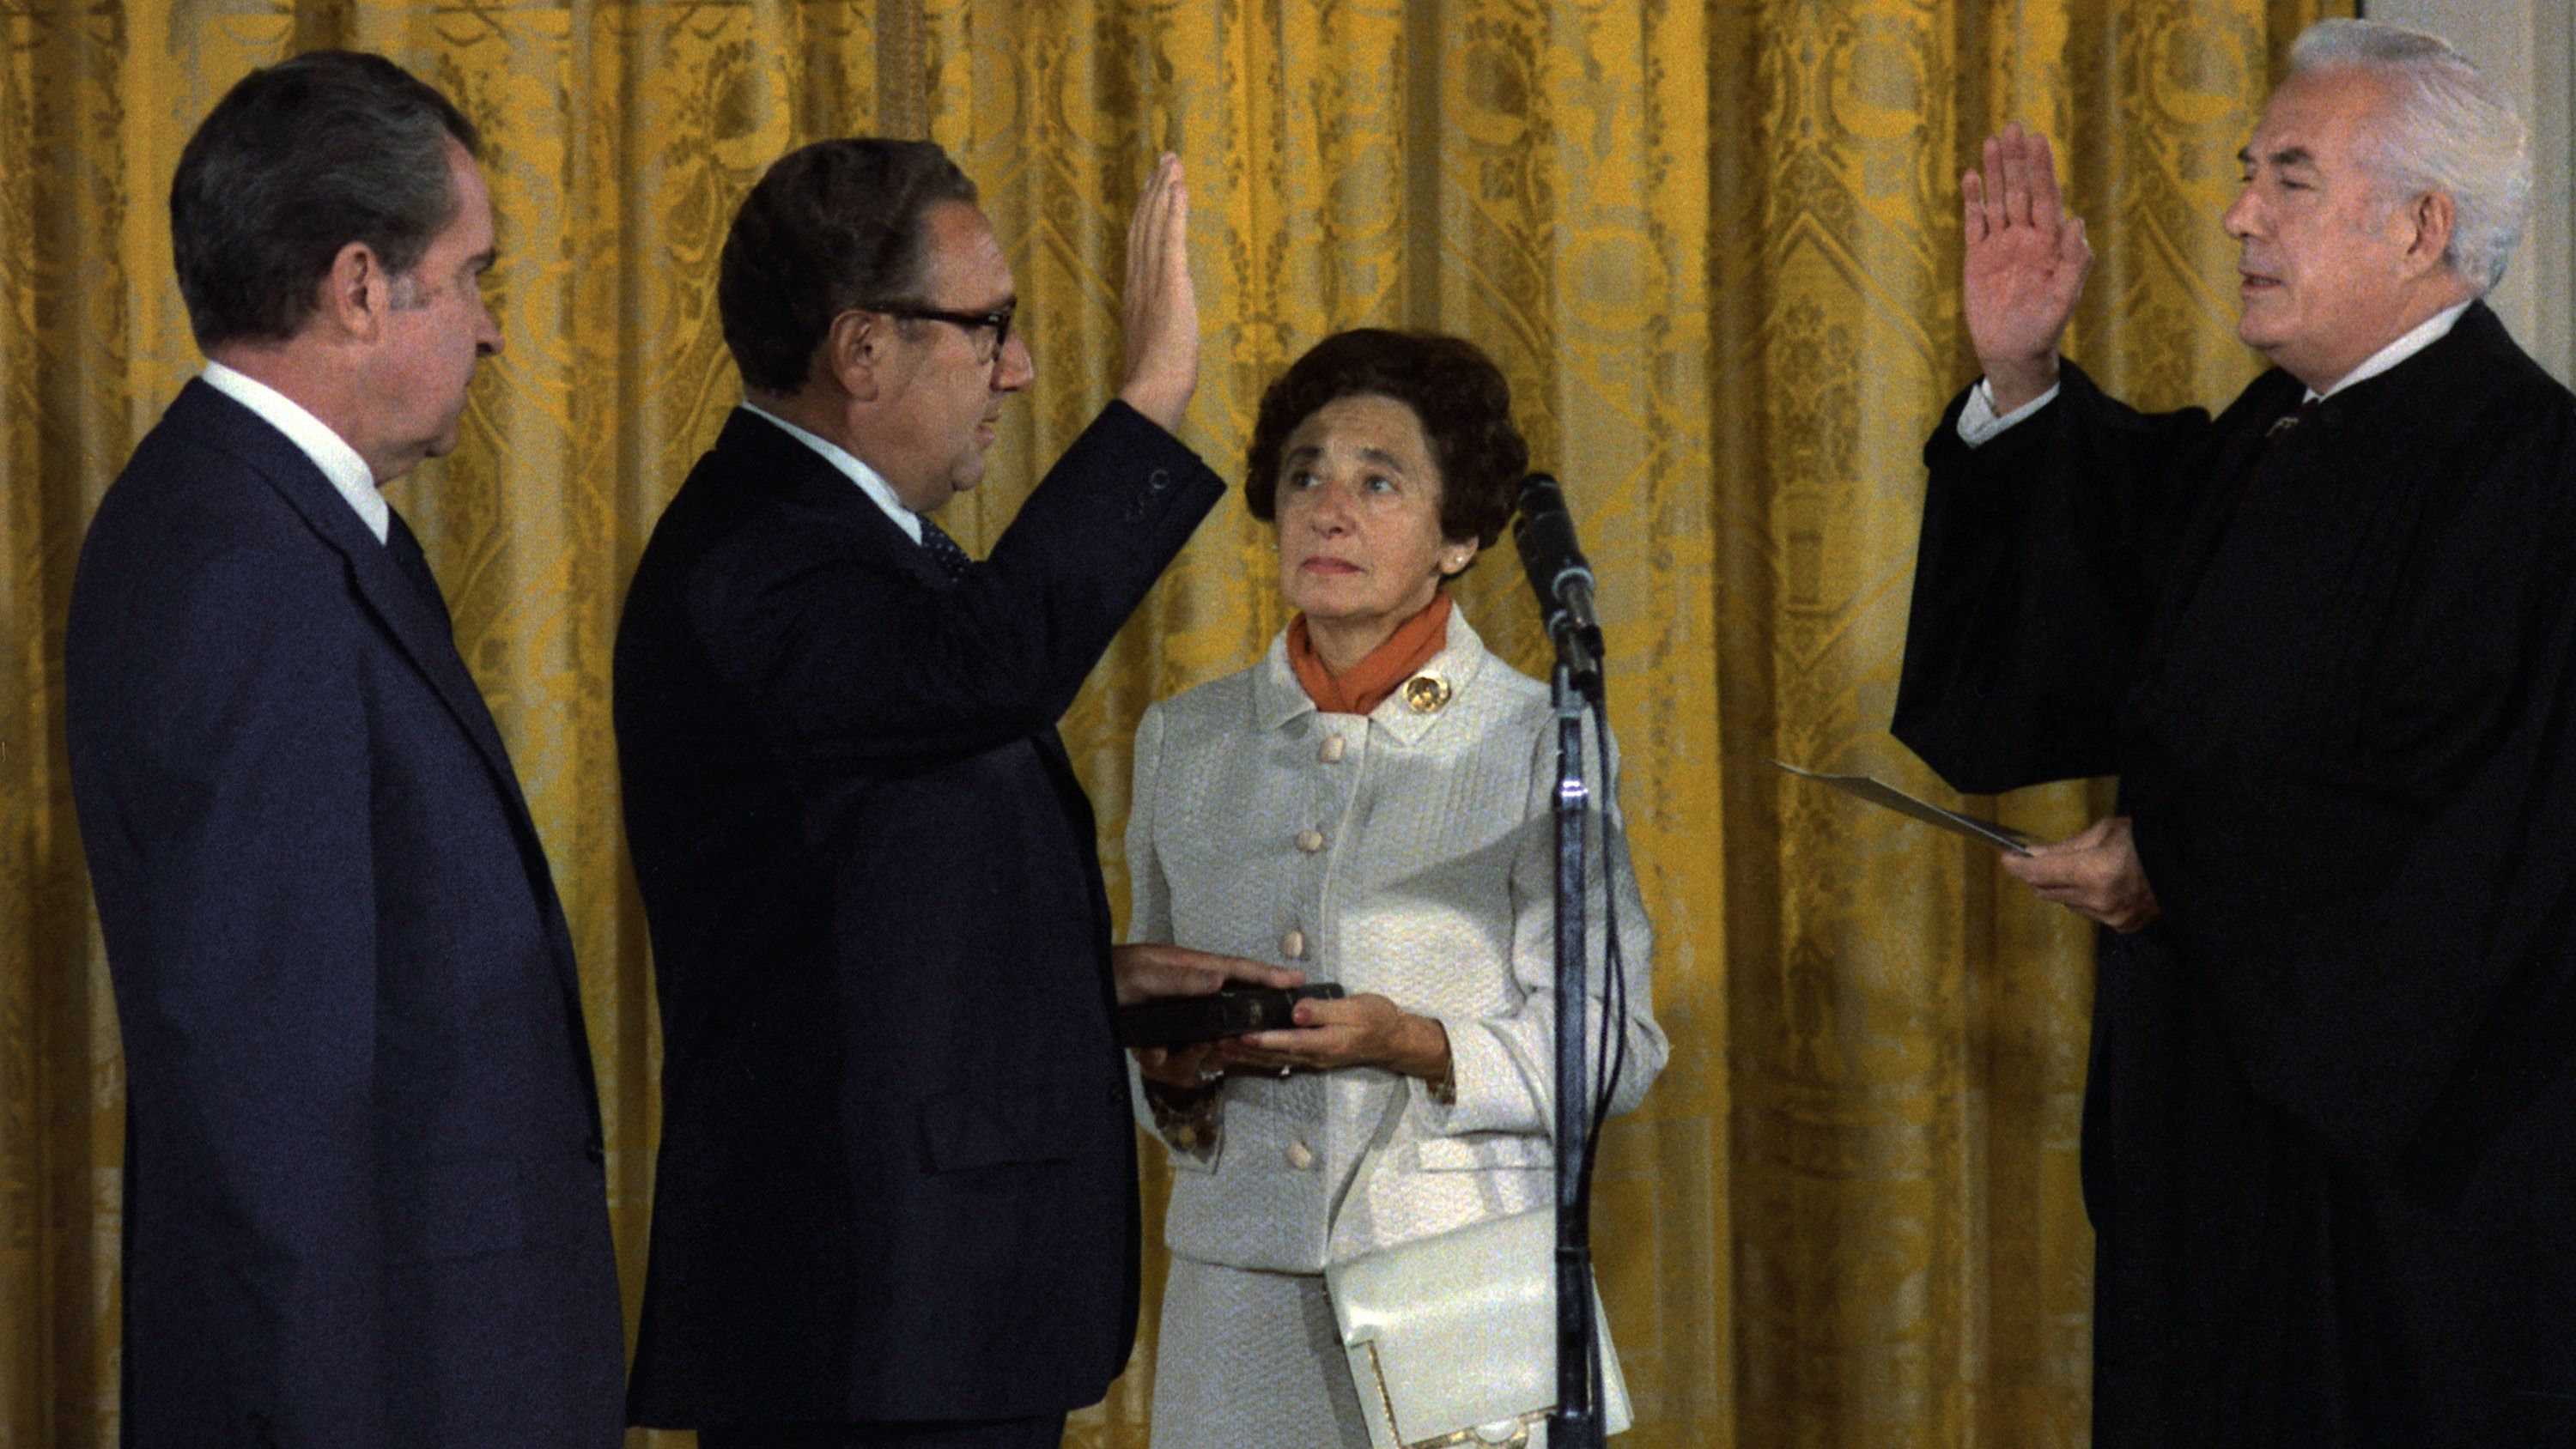 With Nixon watching, Kissinger is sworn in as Secretary of State by Chief Justice Warren Burger in 1973. Nixon called it "very significant in these days when we must think of America as part of the whole world community that for the first time in history a naturalized citizen is the secretary of state of the United States."